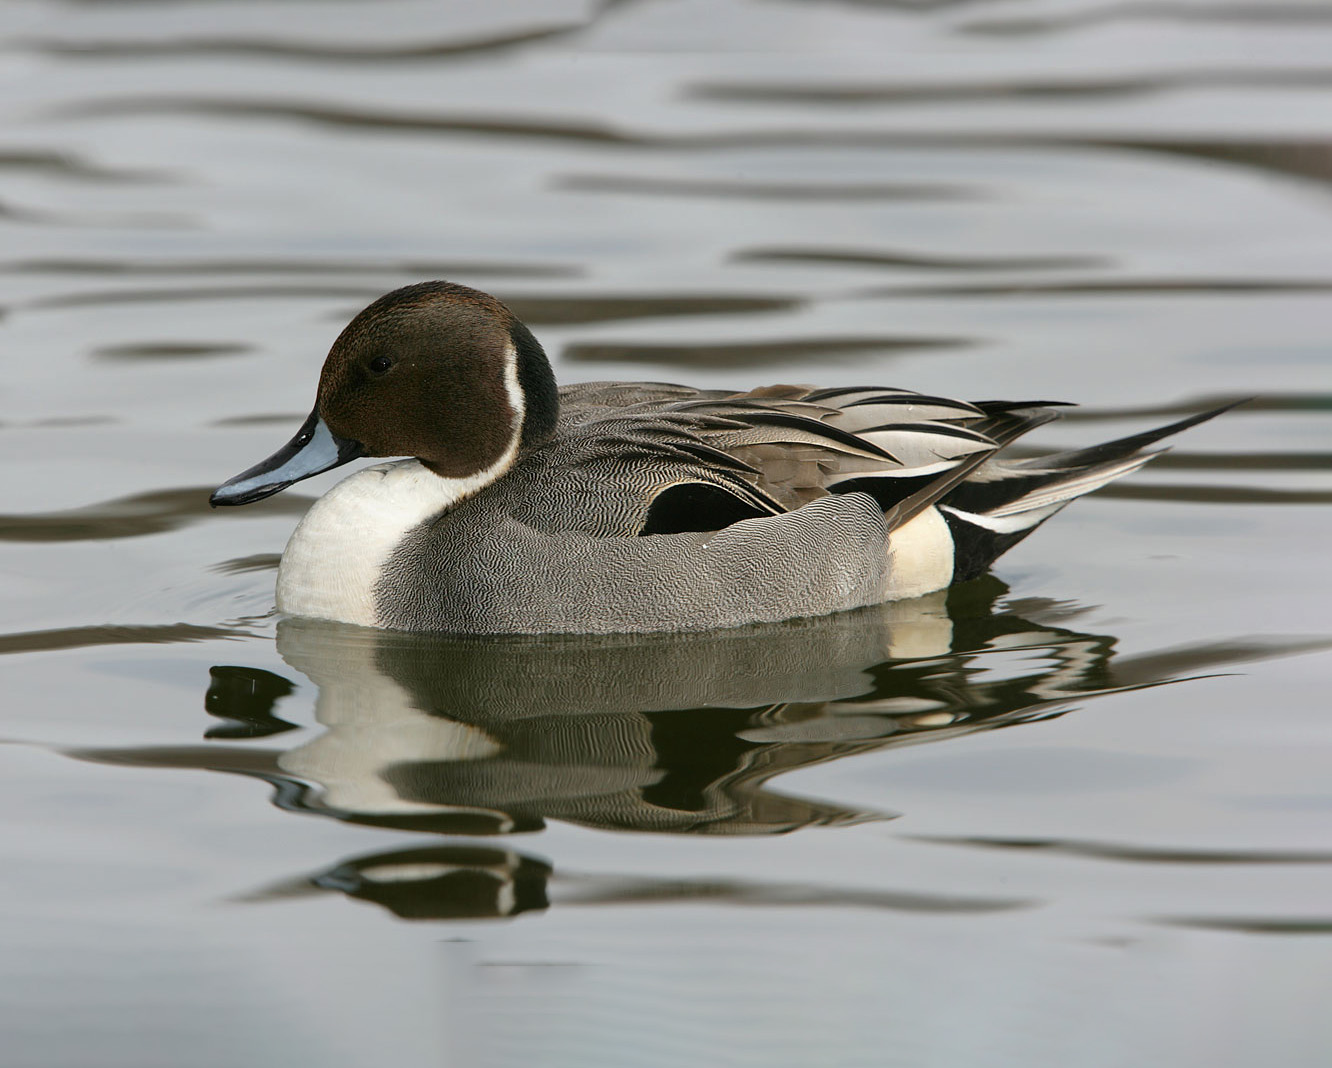 A great diversity of waterfowl visits the Prospect Park Lake every year, including the Northern Pintail (here, a male). Photo: Steve Nanz